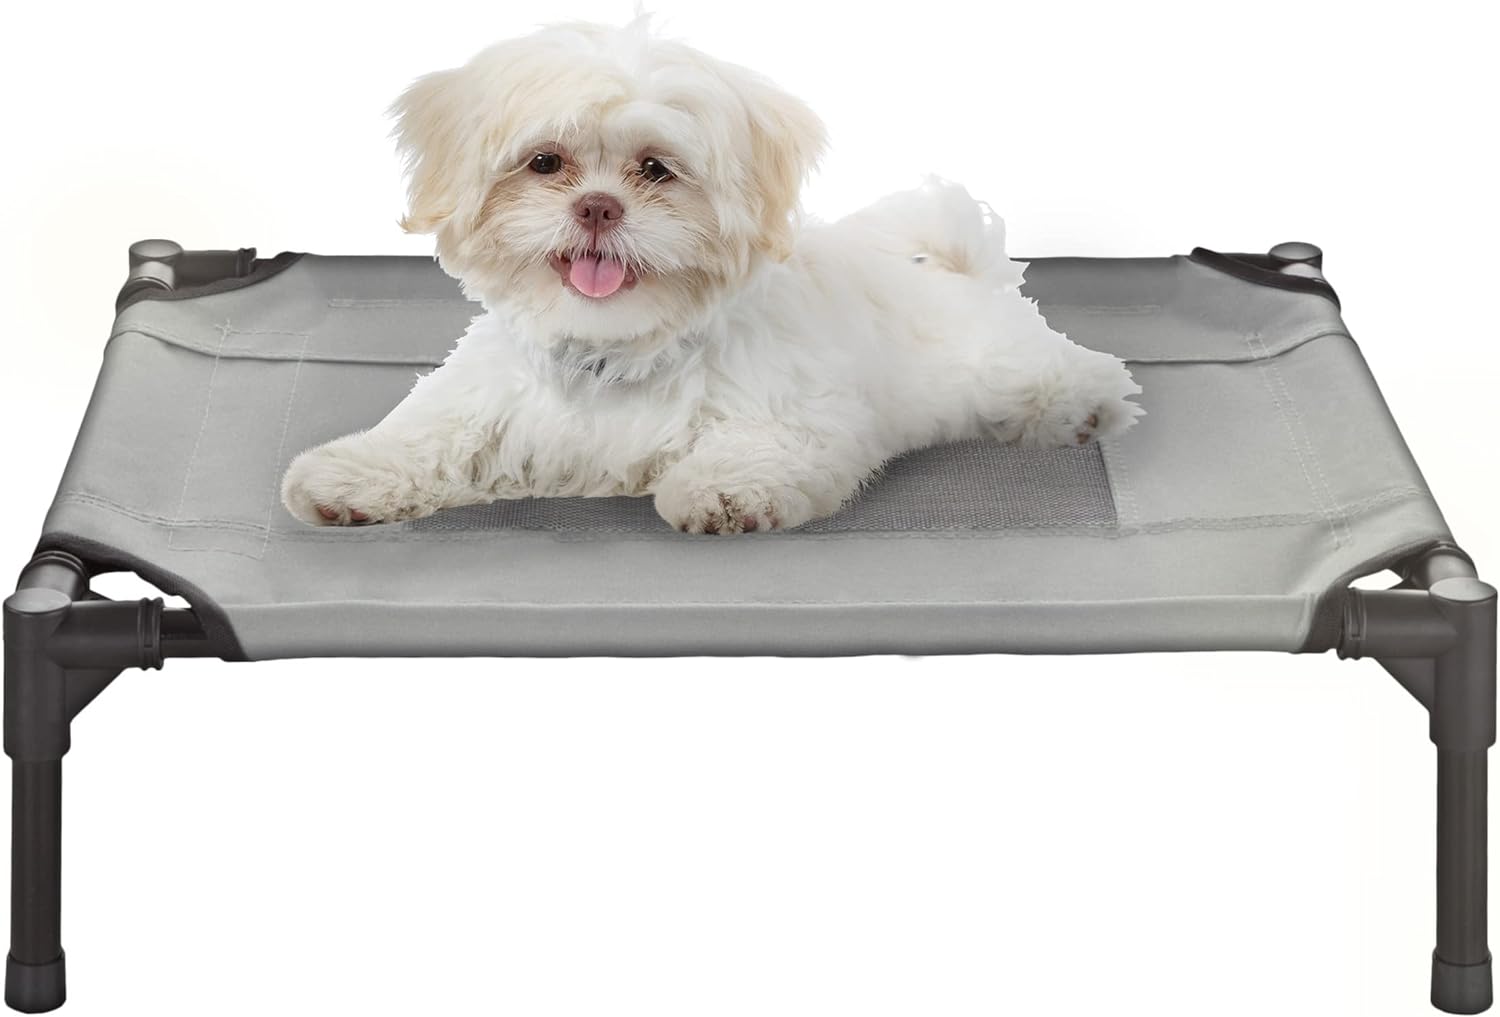 Elevated Dog Bed - 30x24-Inch Portable Pet Bed with Non-Slip Feet - Indoor/Outdoor Dog Cot or Puppy Bed for Pets up to 50lbs by (Blue)